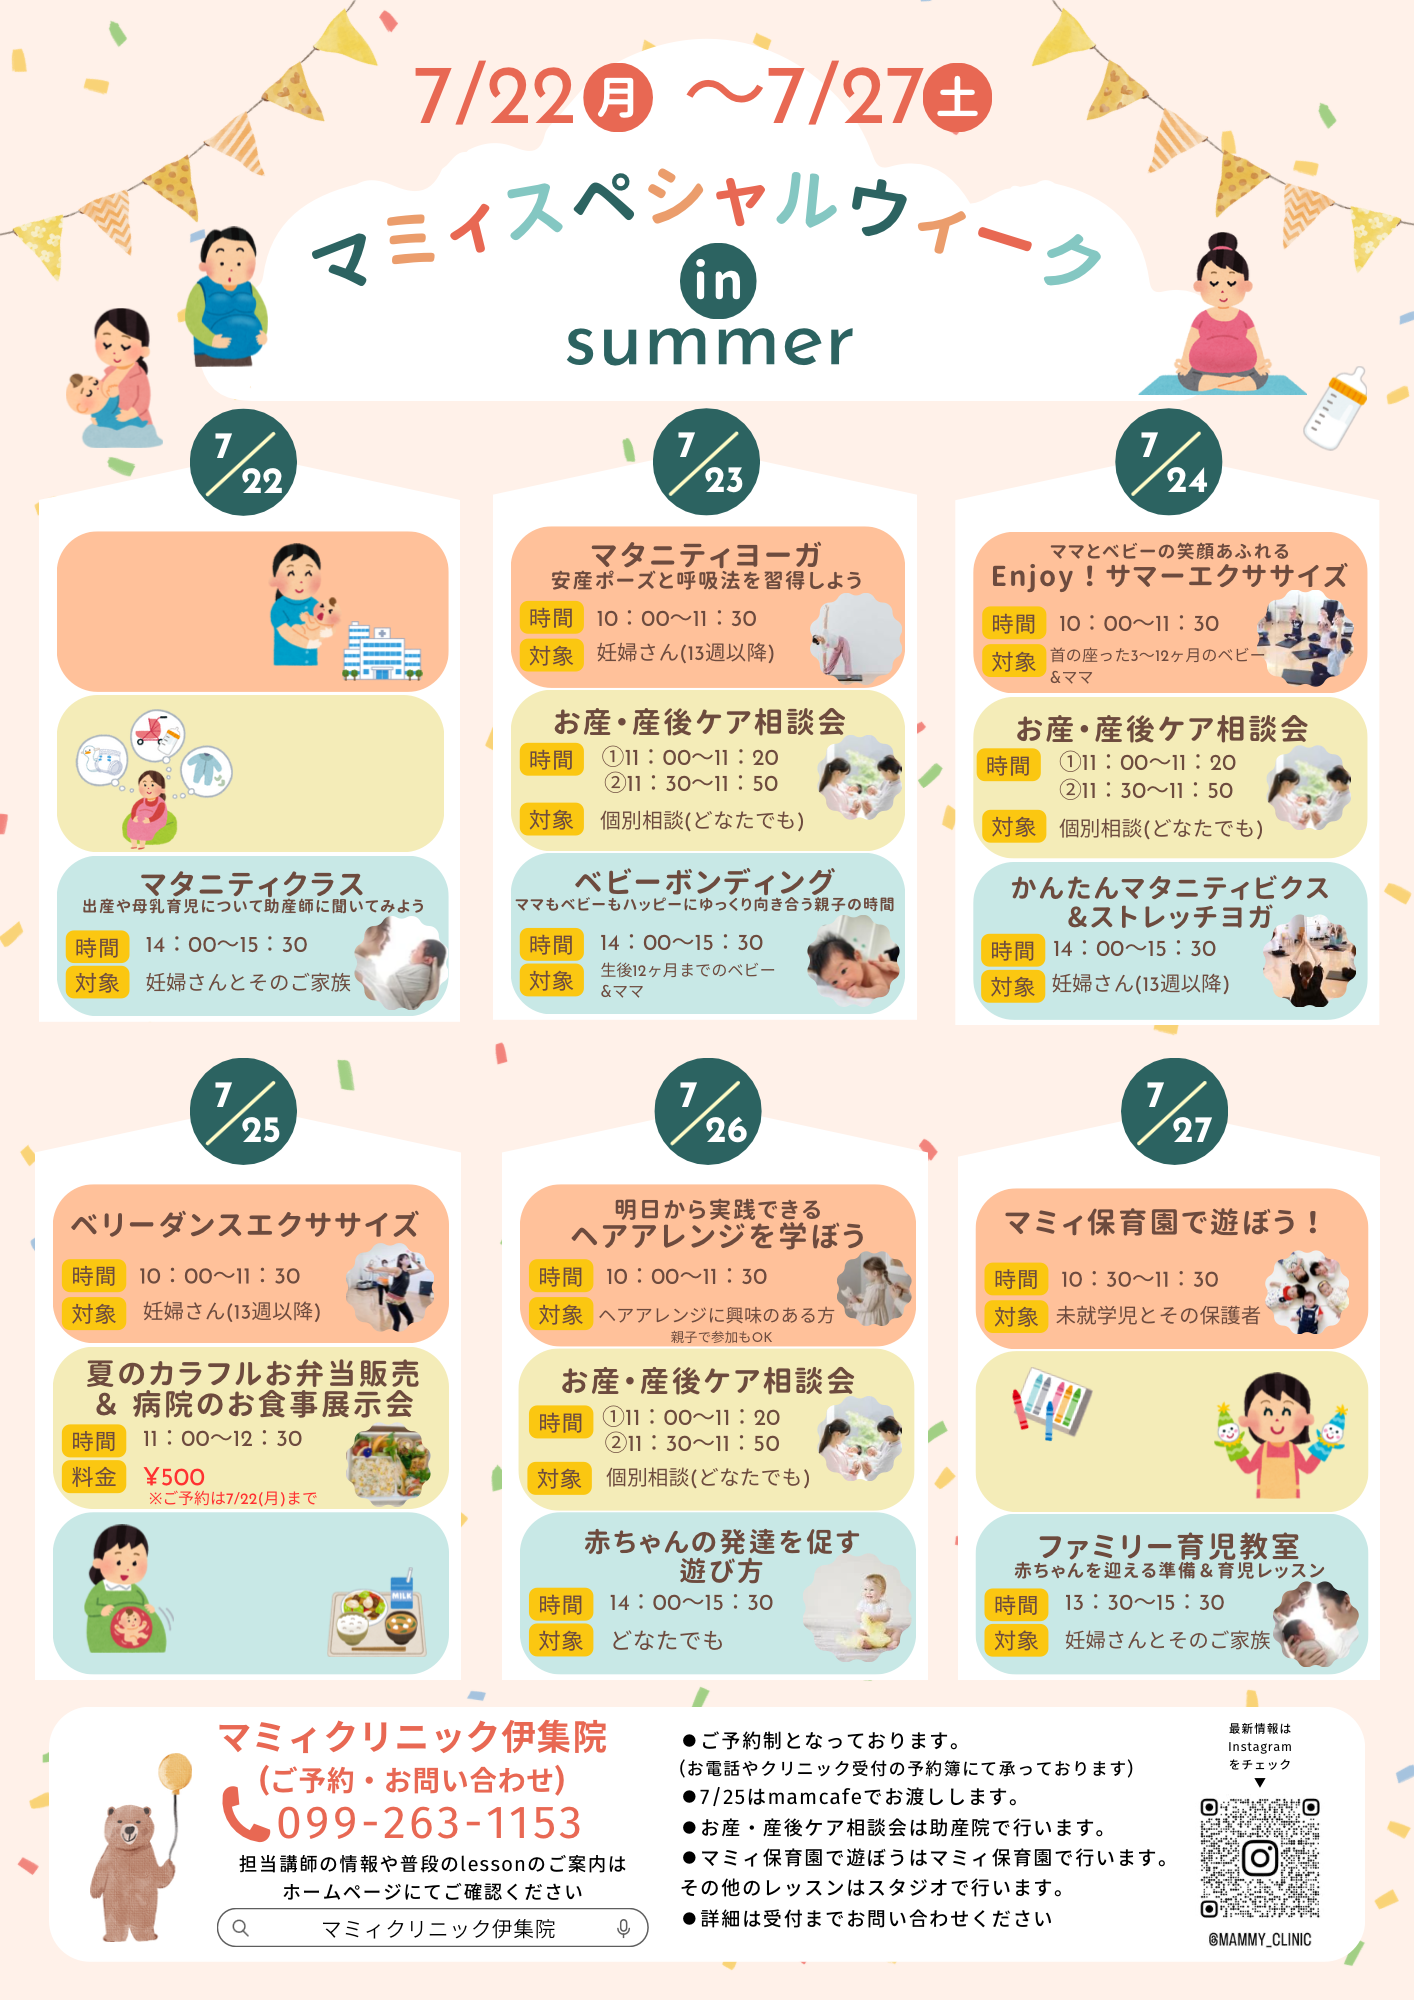 🌼summer special lesson🌼